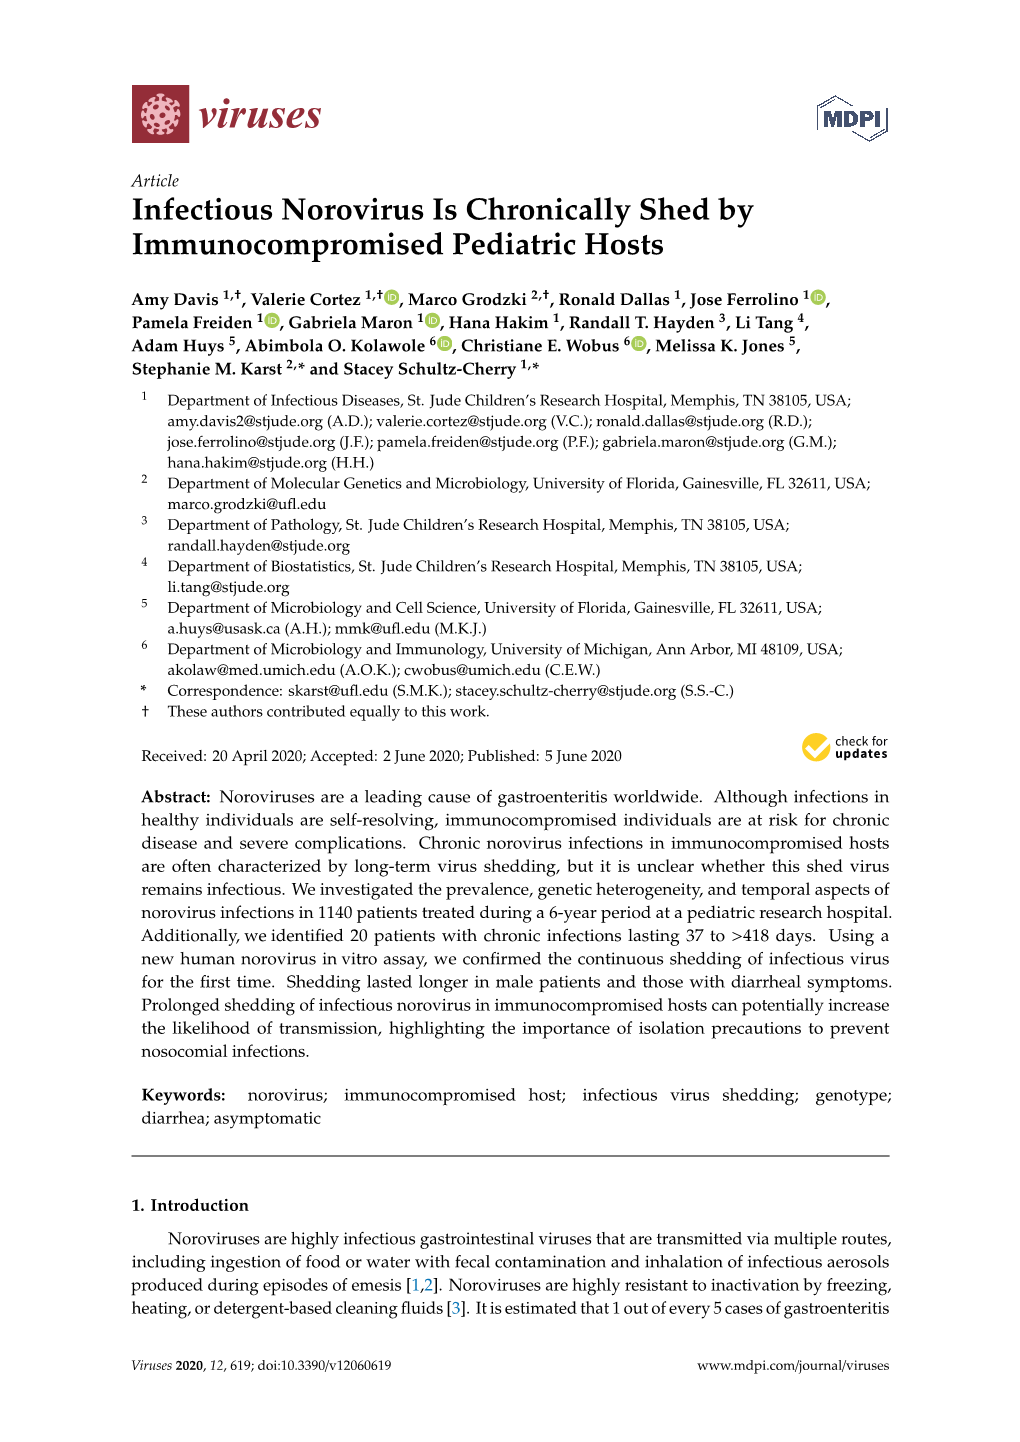 Infectious Norovirus Is Chronically Shed by Immunocompromised Pediatric Hosts